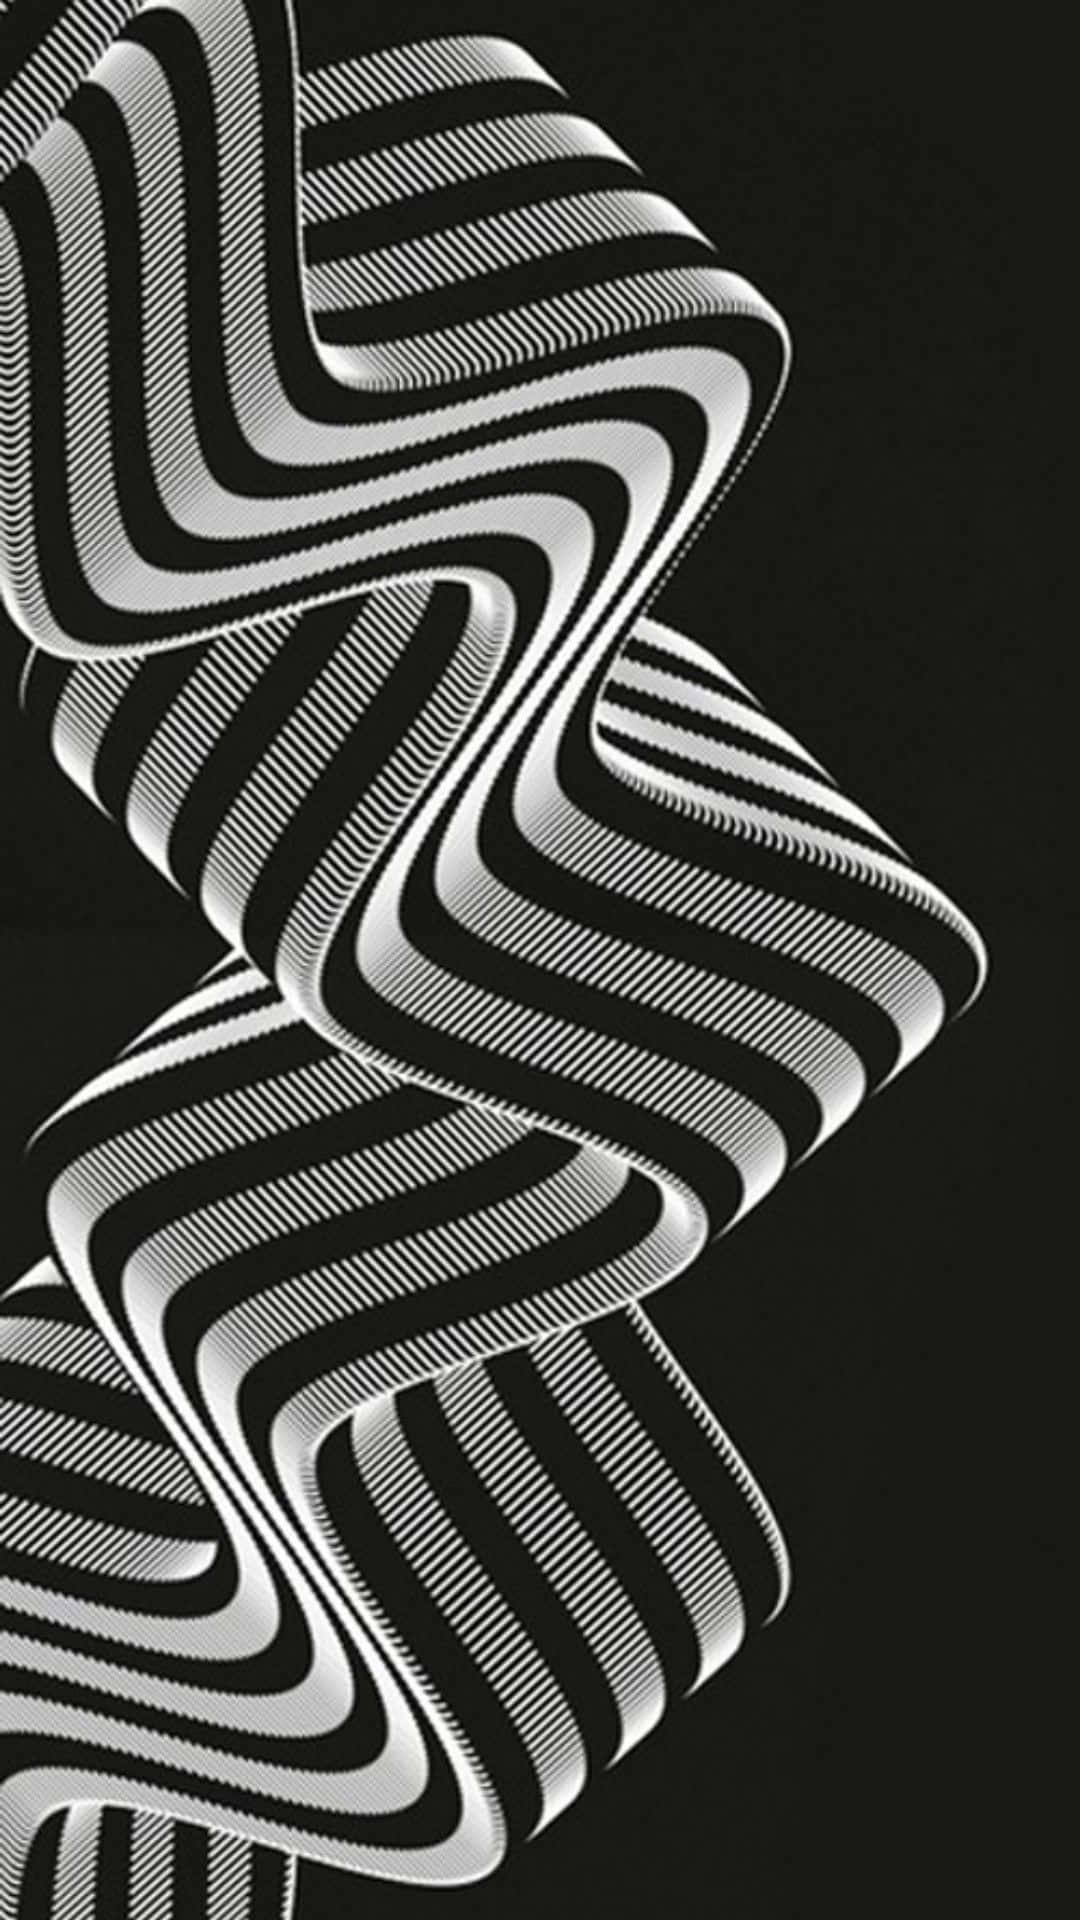 Stripes Abstract Black And White Pattern Wallpaper